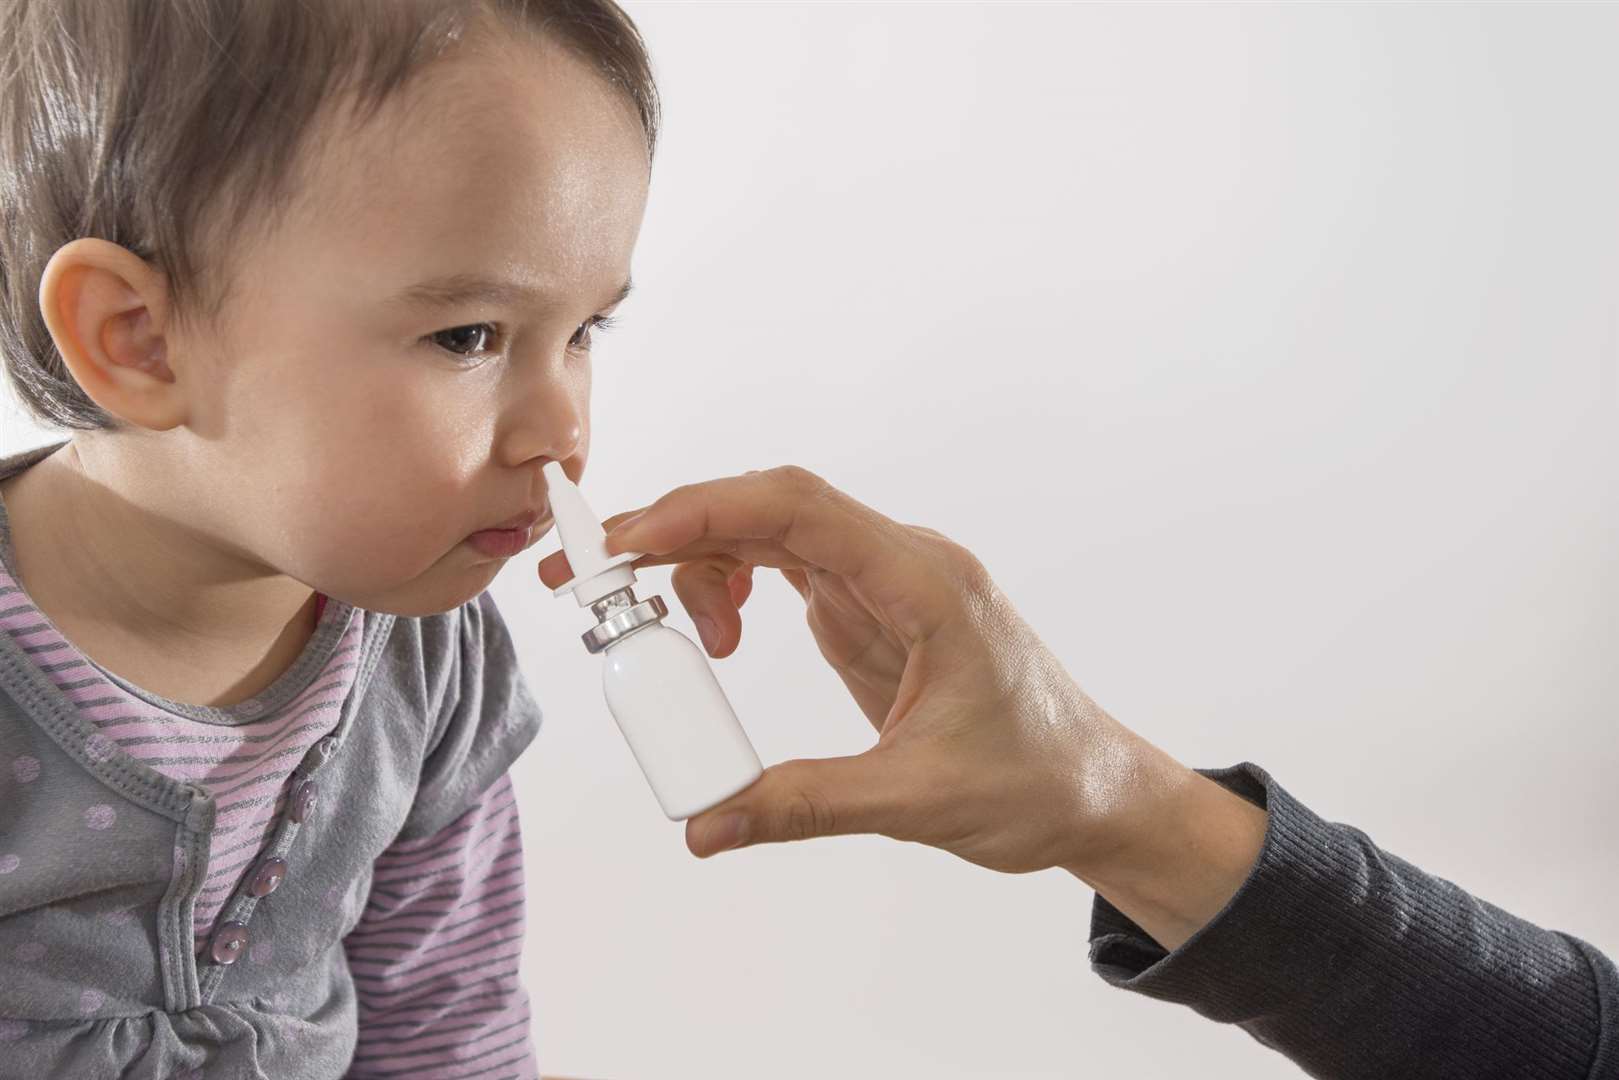 Health chiefs say using a nasal spray rather than injection means the process is completely painless for children